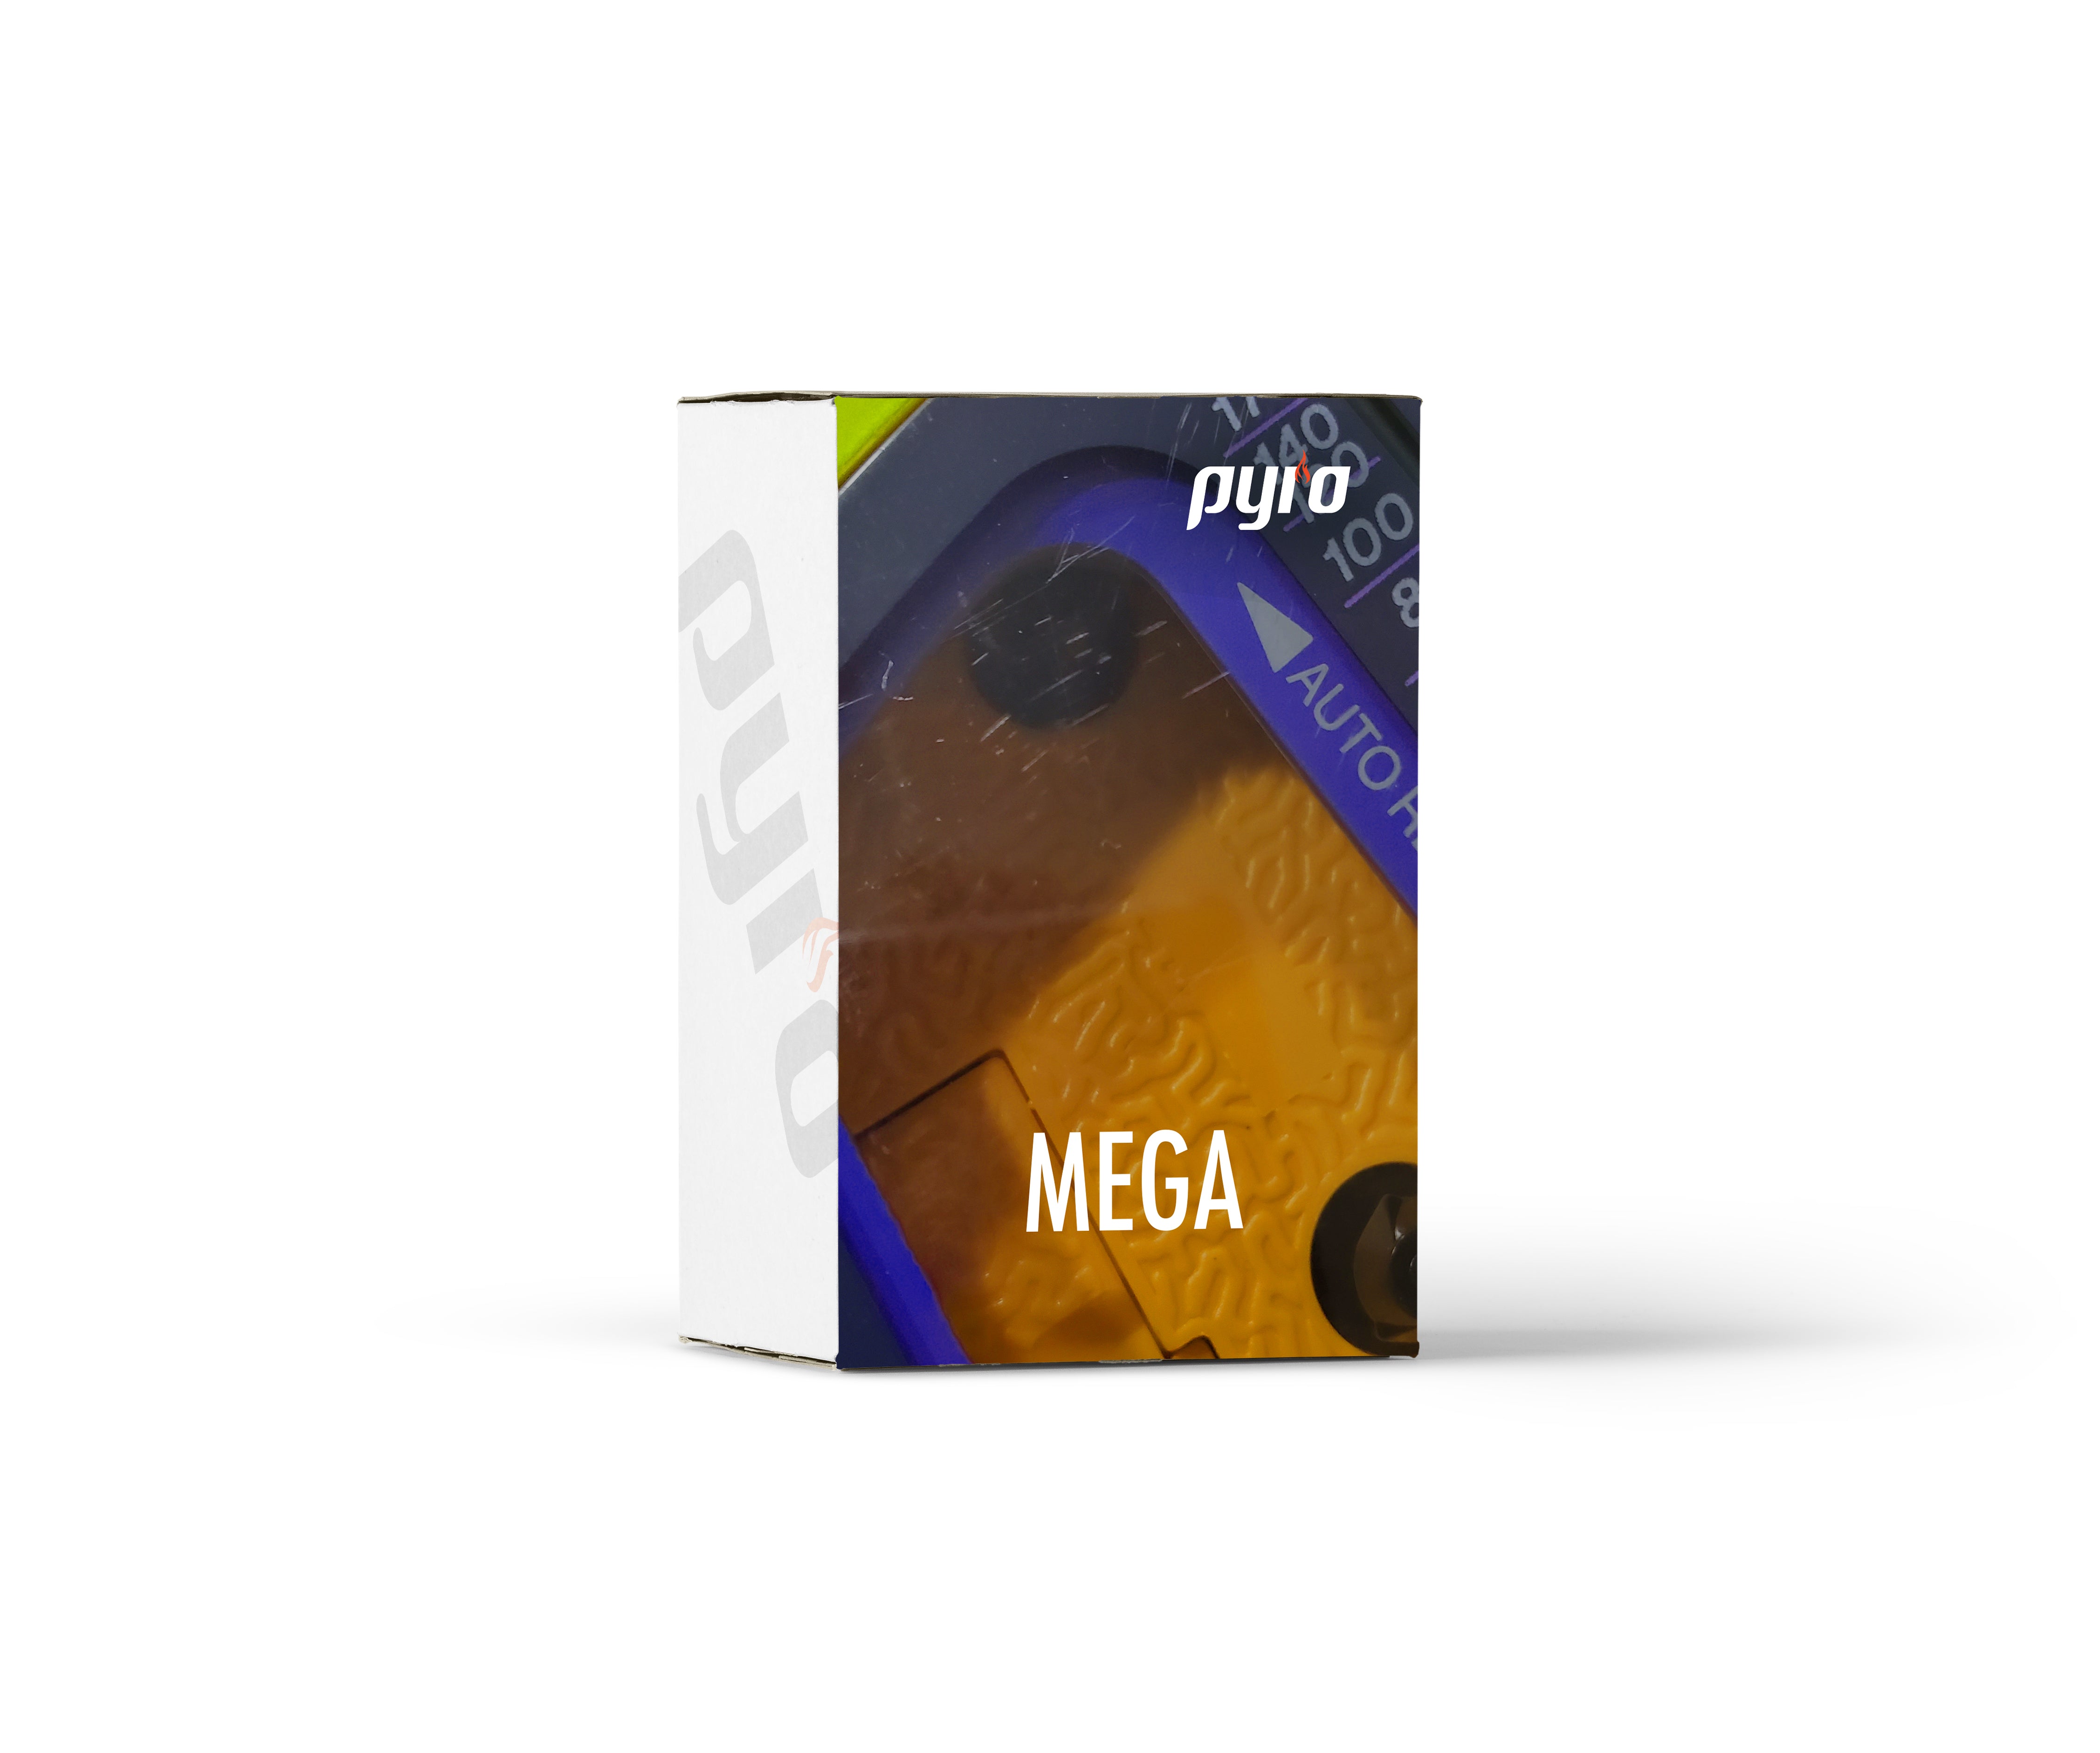 MEGA | Cassette Tape Sound Pack with Generational & Binaural 